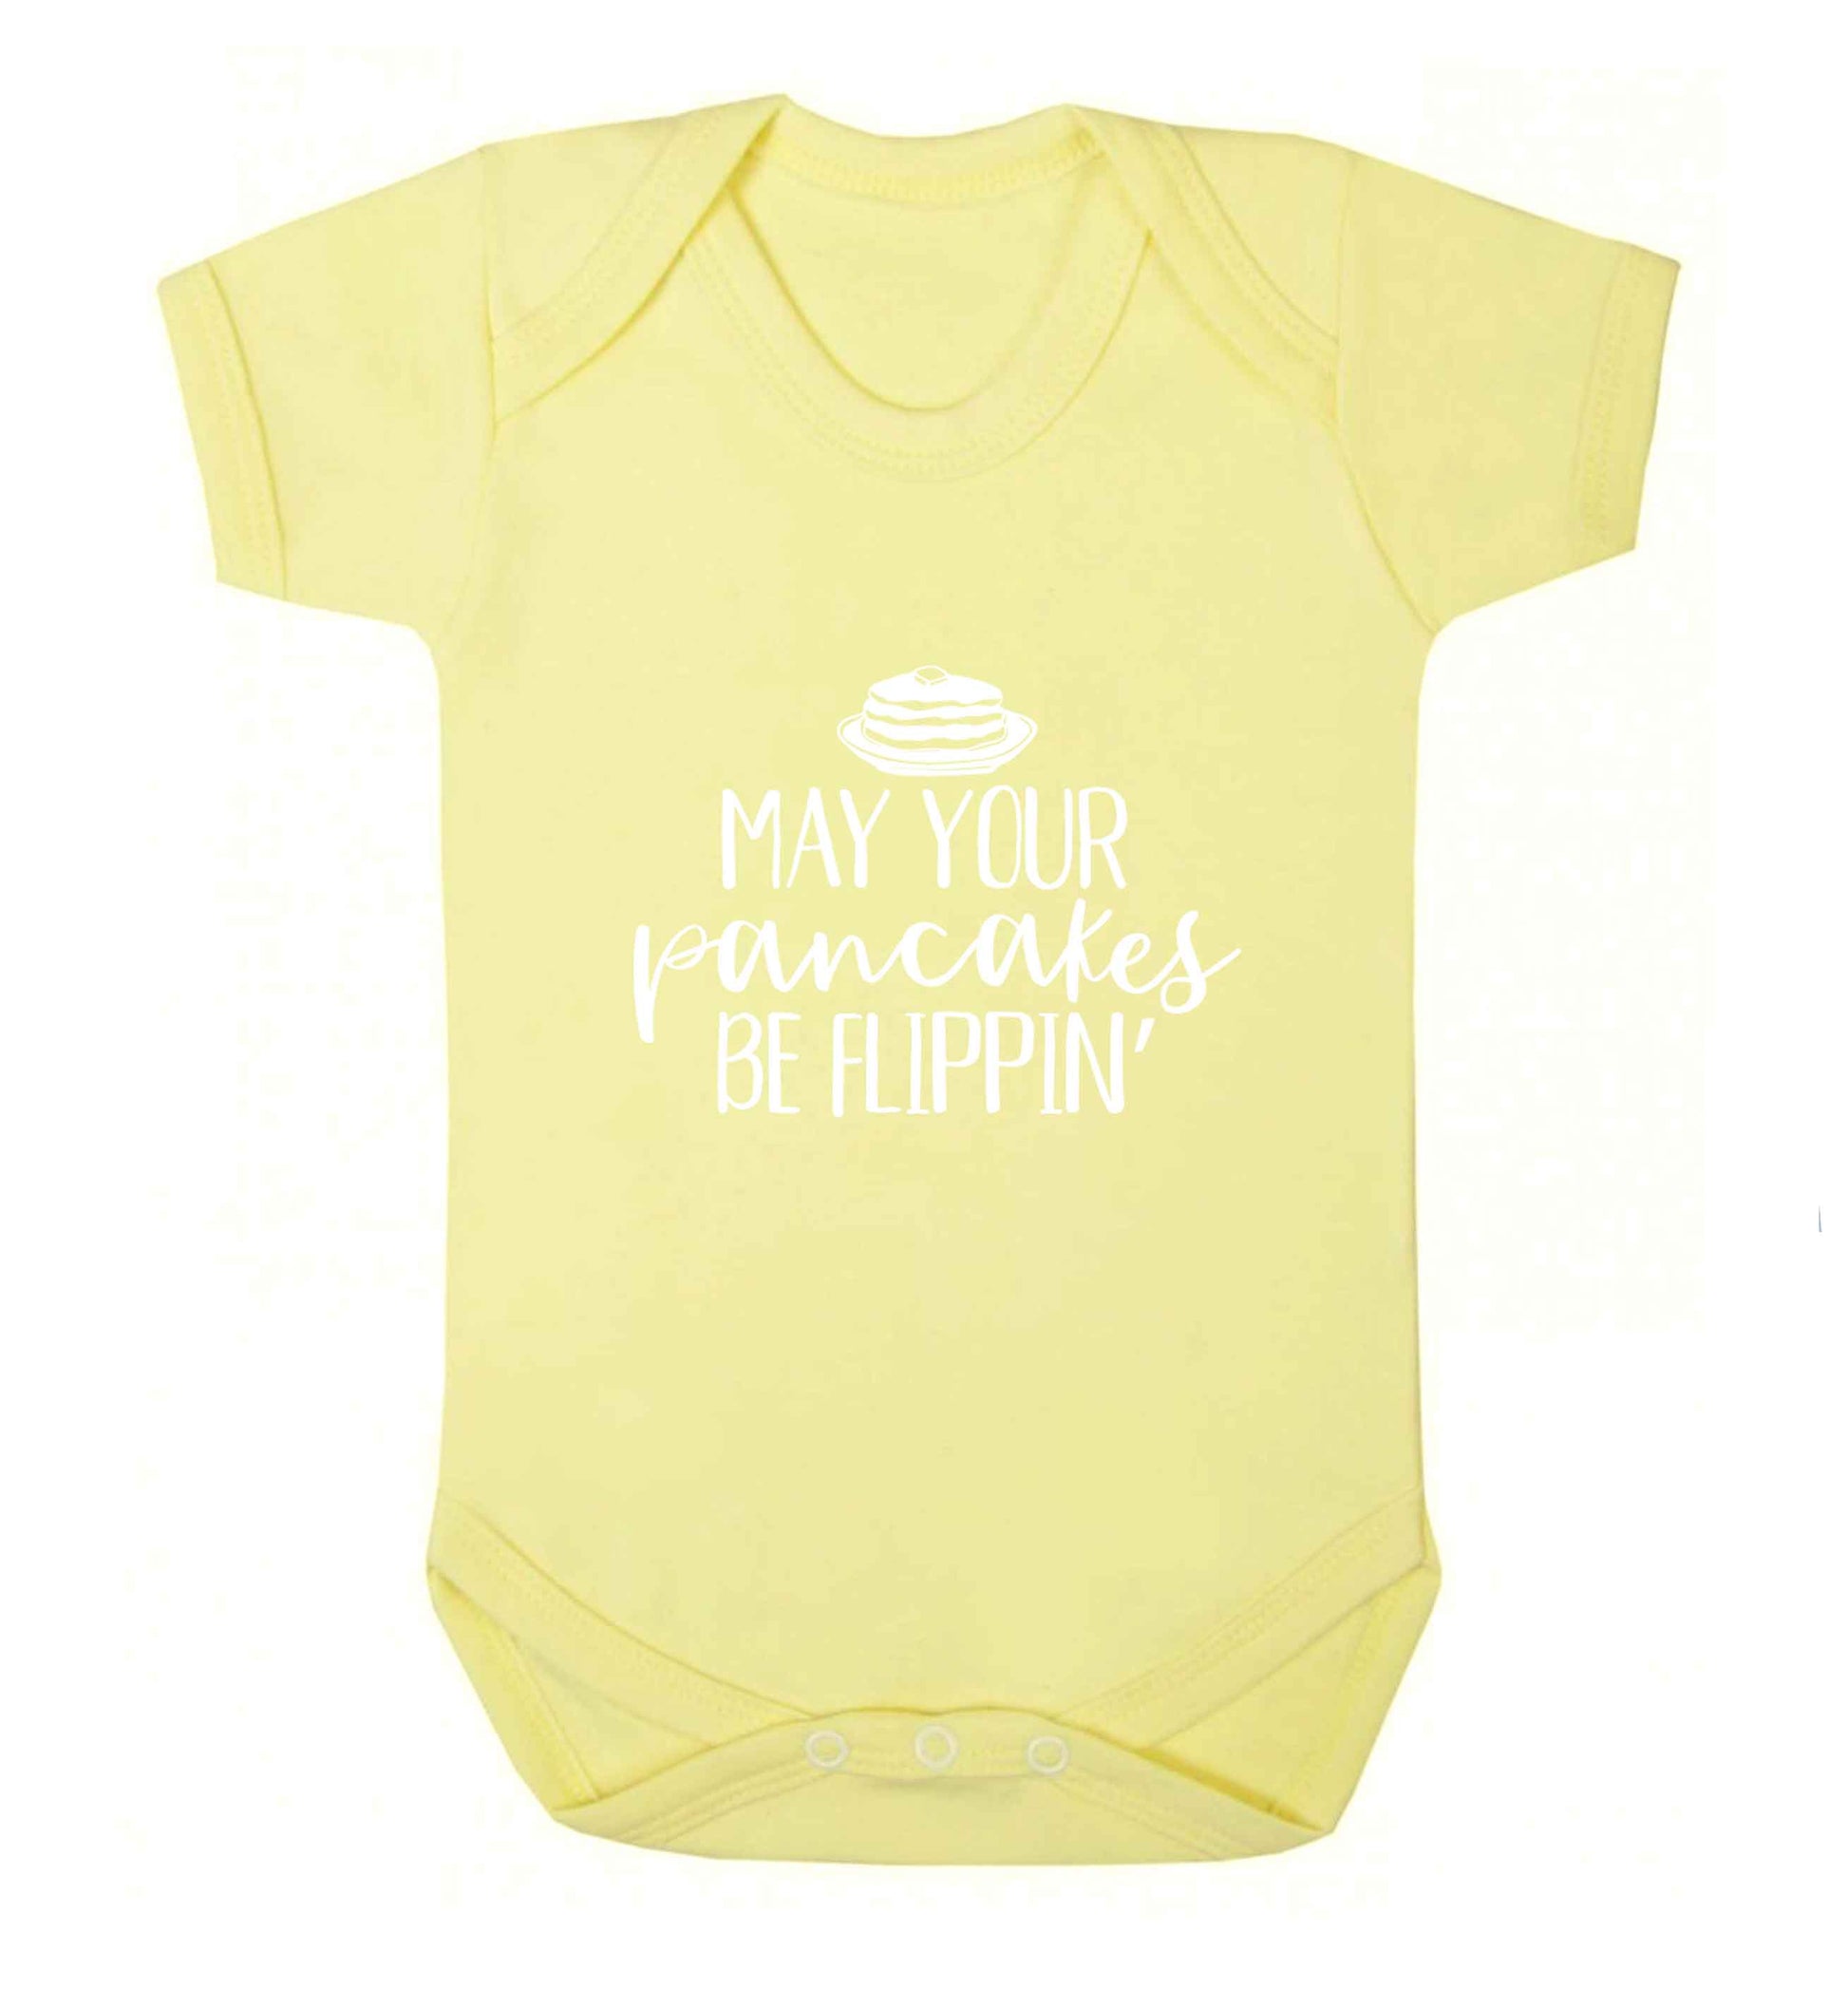 May your pancakes be flippin' baby vest pale yellow 18-24 months